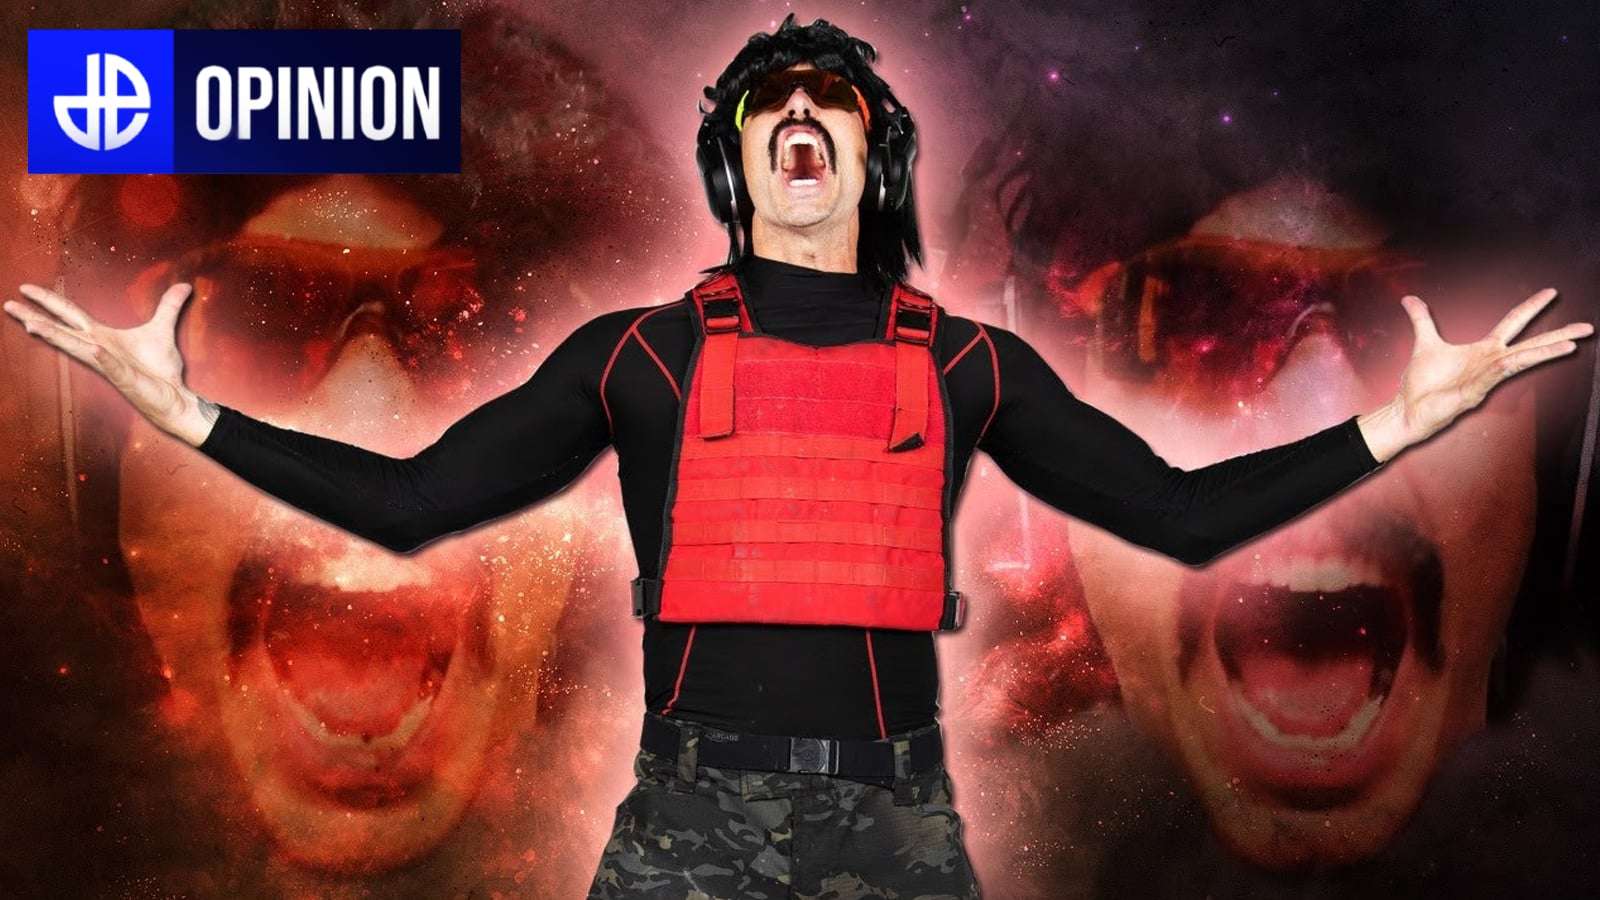 Dr Disrespect stands yelling in front of YouTube after his Twitch ban.